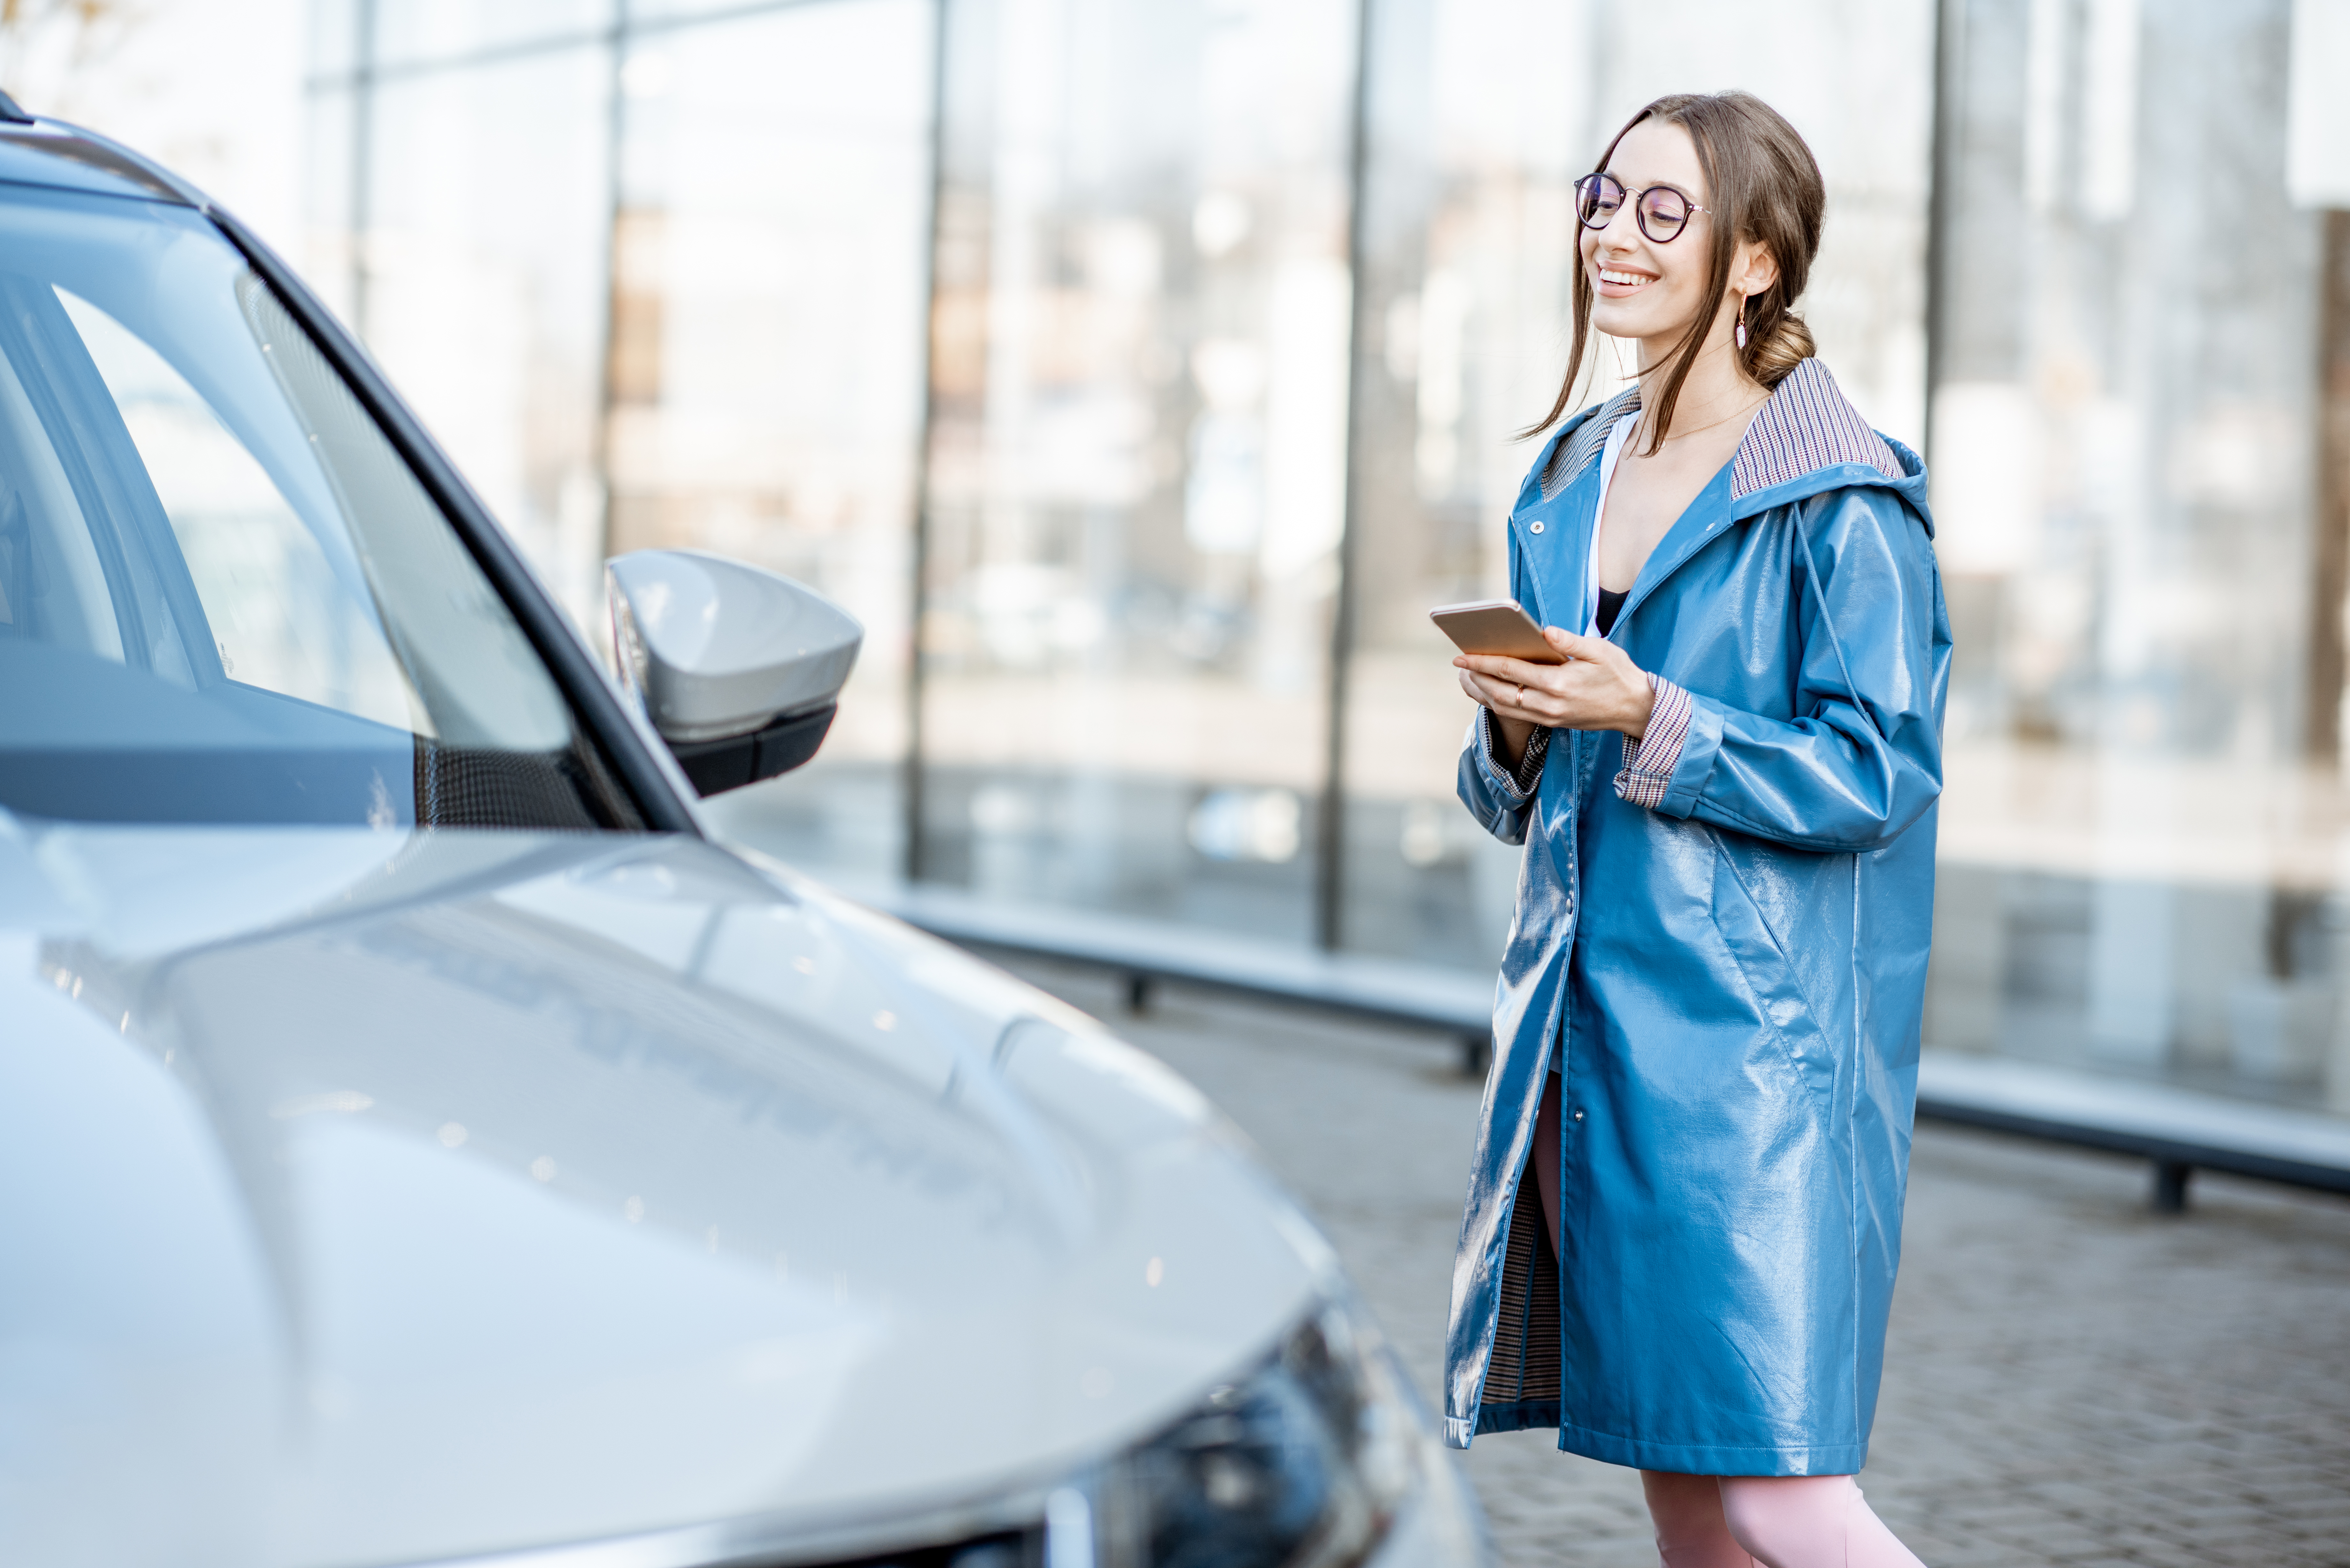 Effective Digital Marketing Strategies for Selling Used Cars